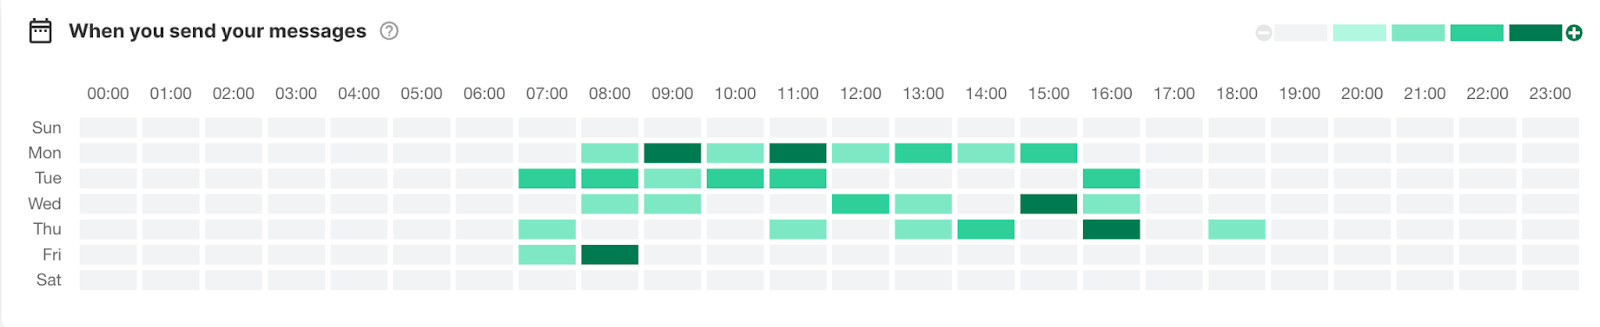 Timetable of when you send your messages 